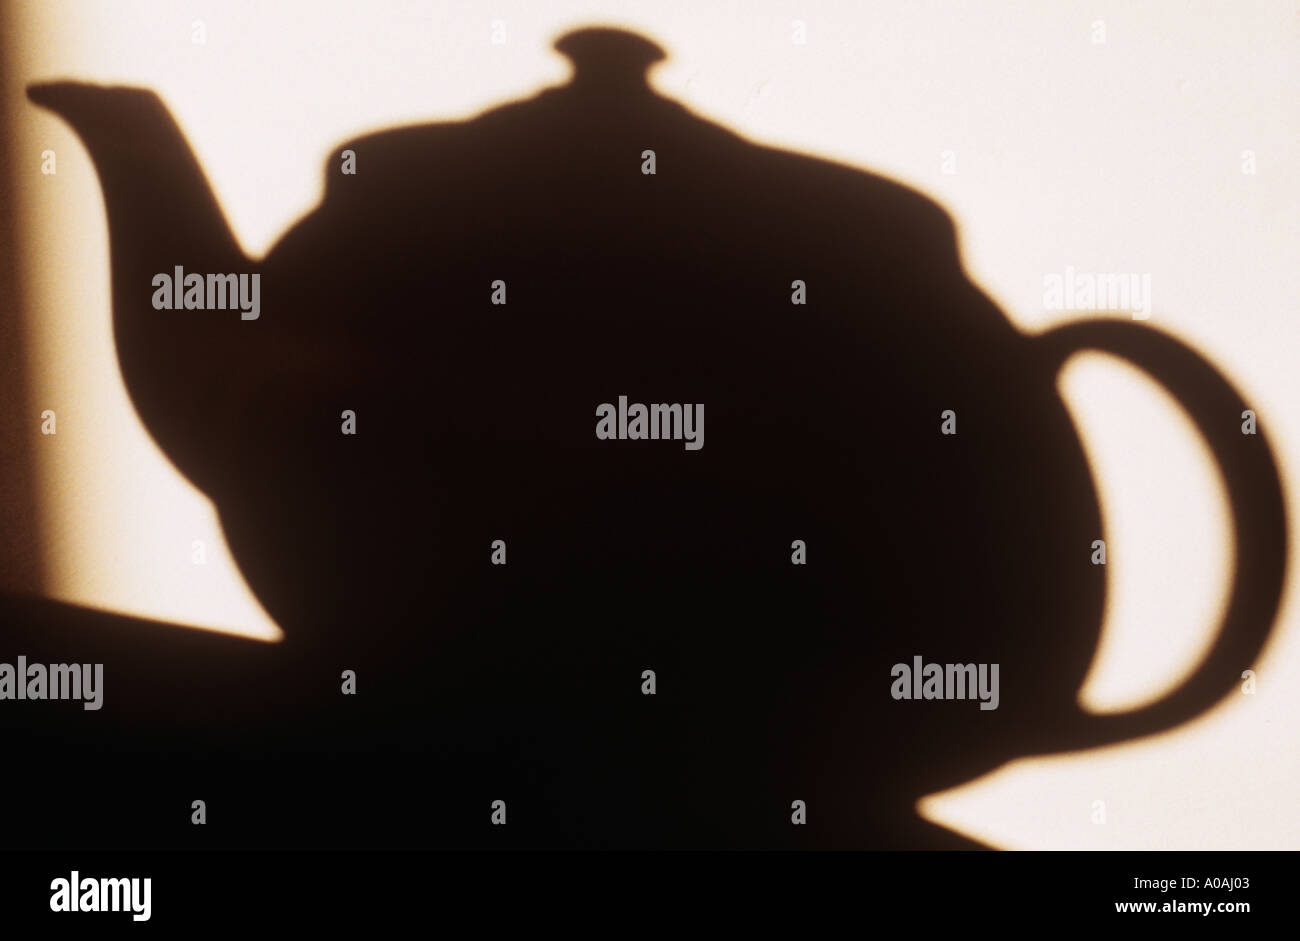 Shadow on wall of teapot standing on a table Stock Photo